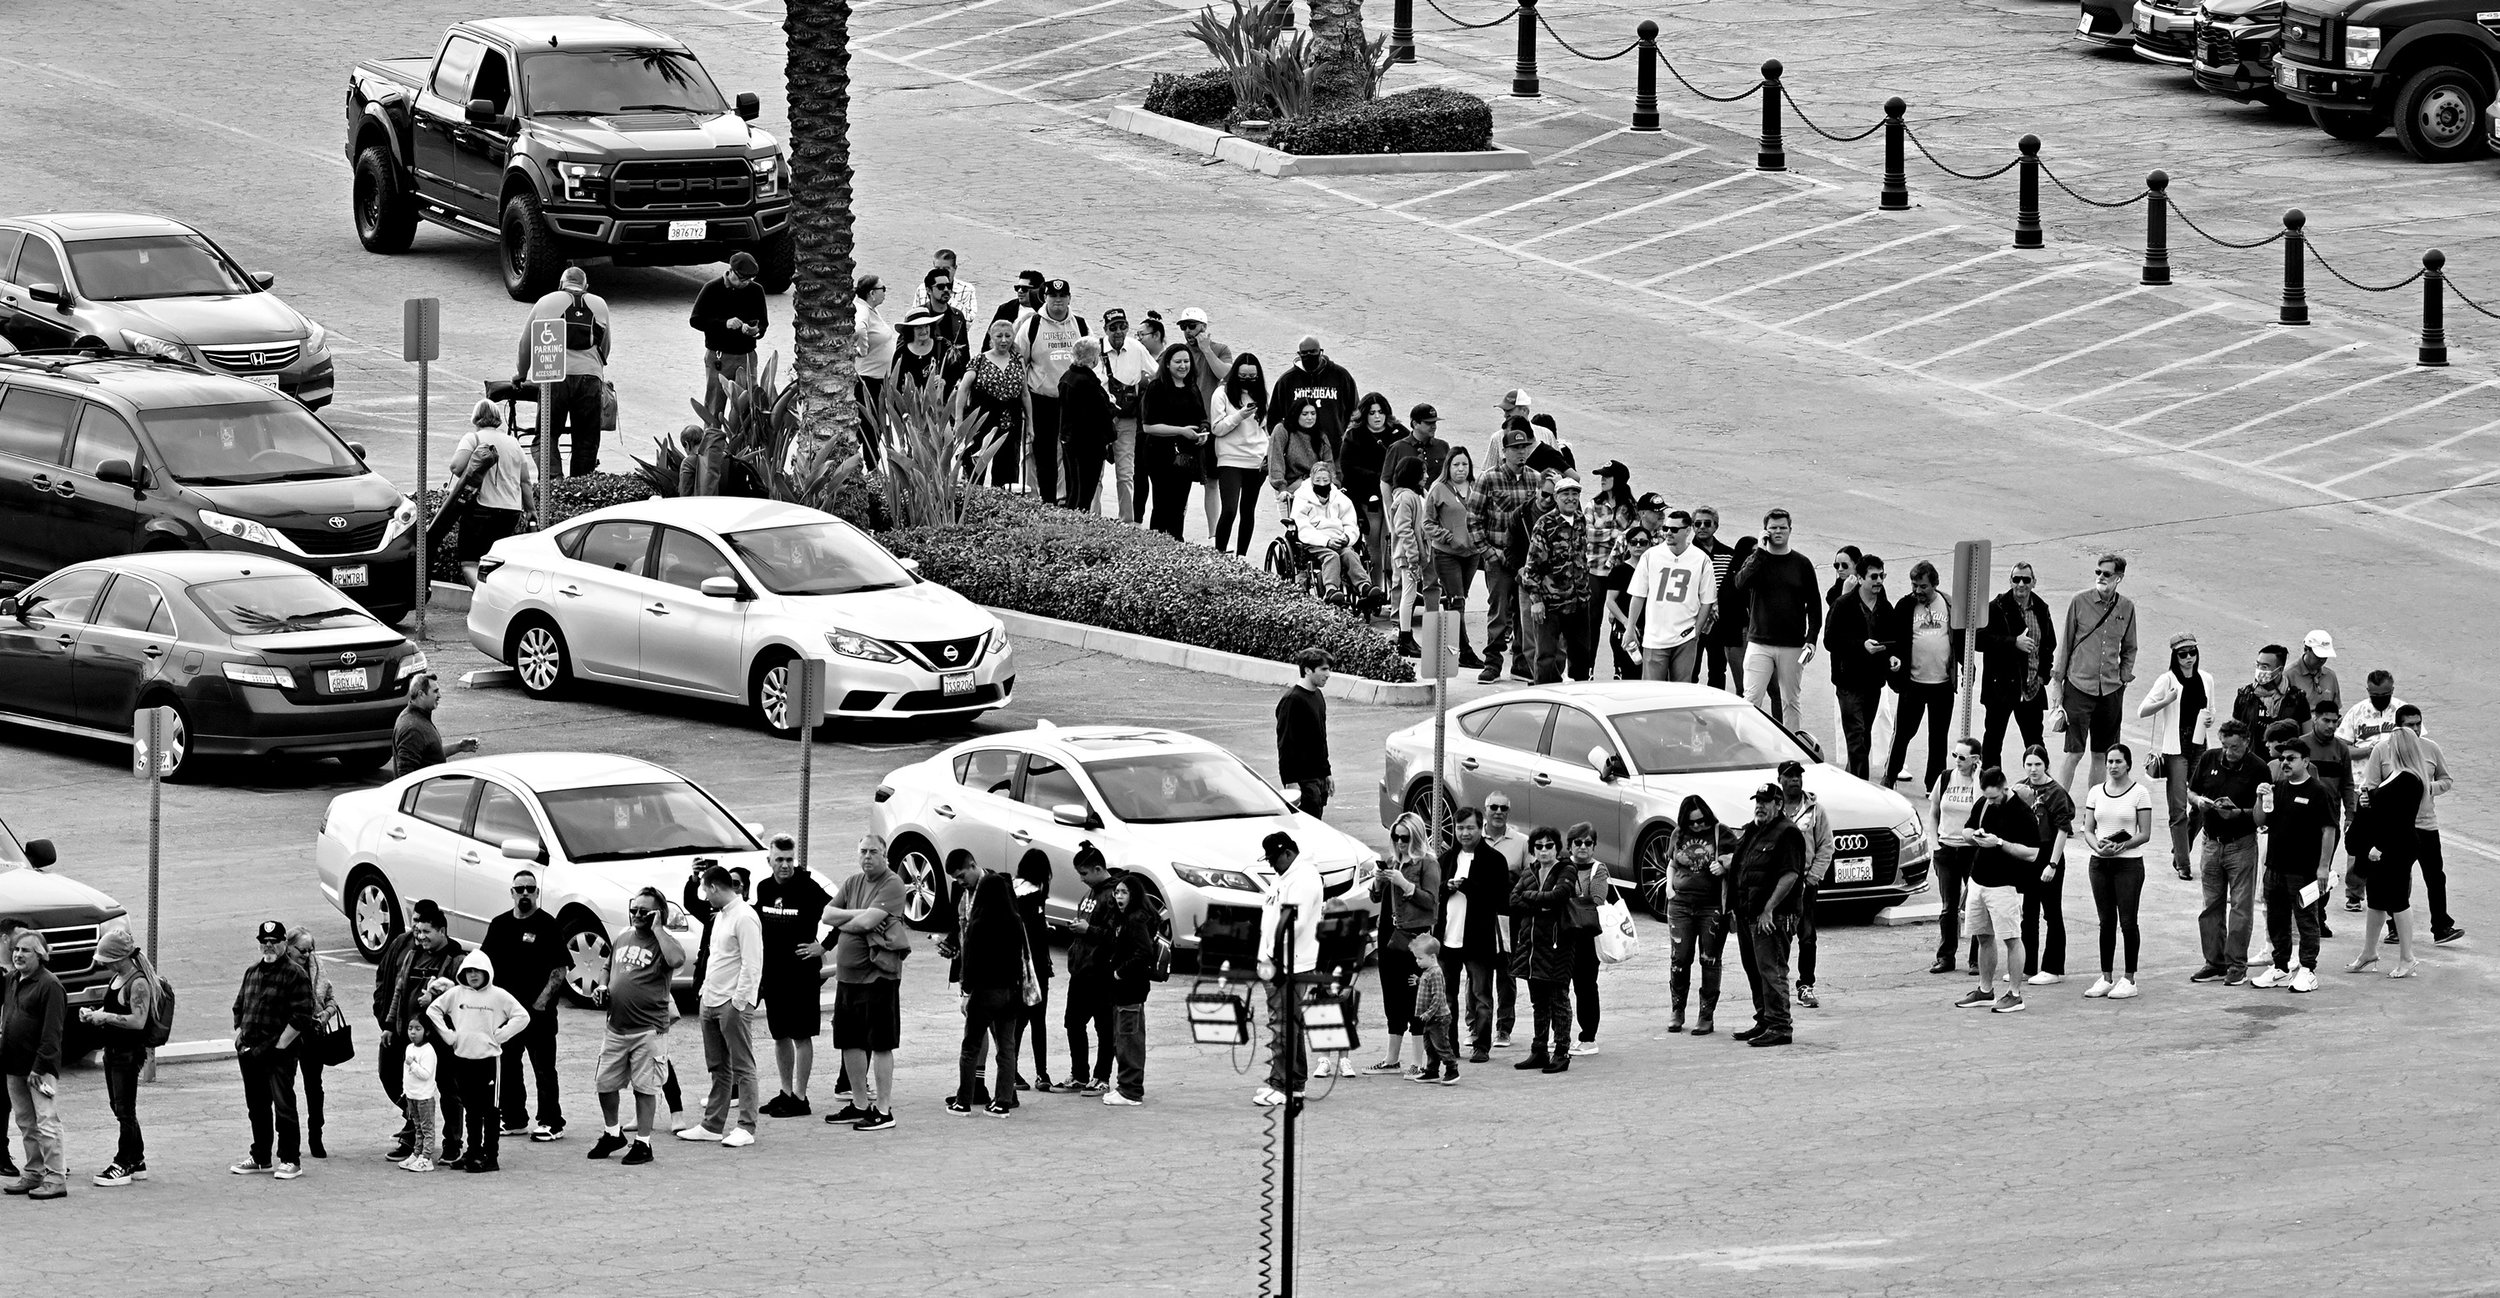  People wait in line in the parking lot to enter on Opening day of the winter-spring meet at Santa Anita Park in Arcadia on Monday, December 26, 2022. The line was so long the track started letting people in for free.  